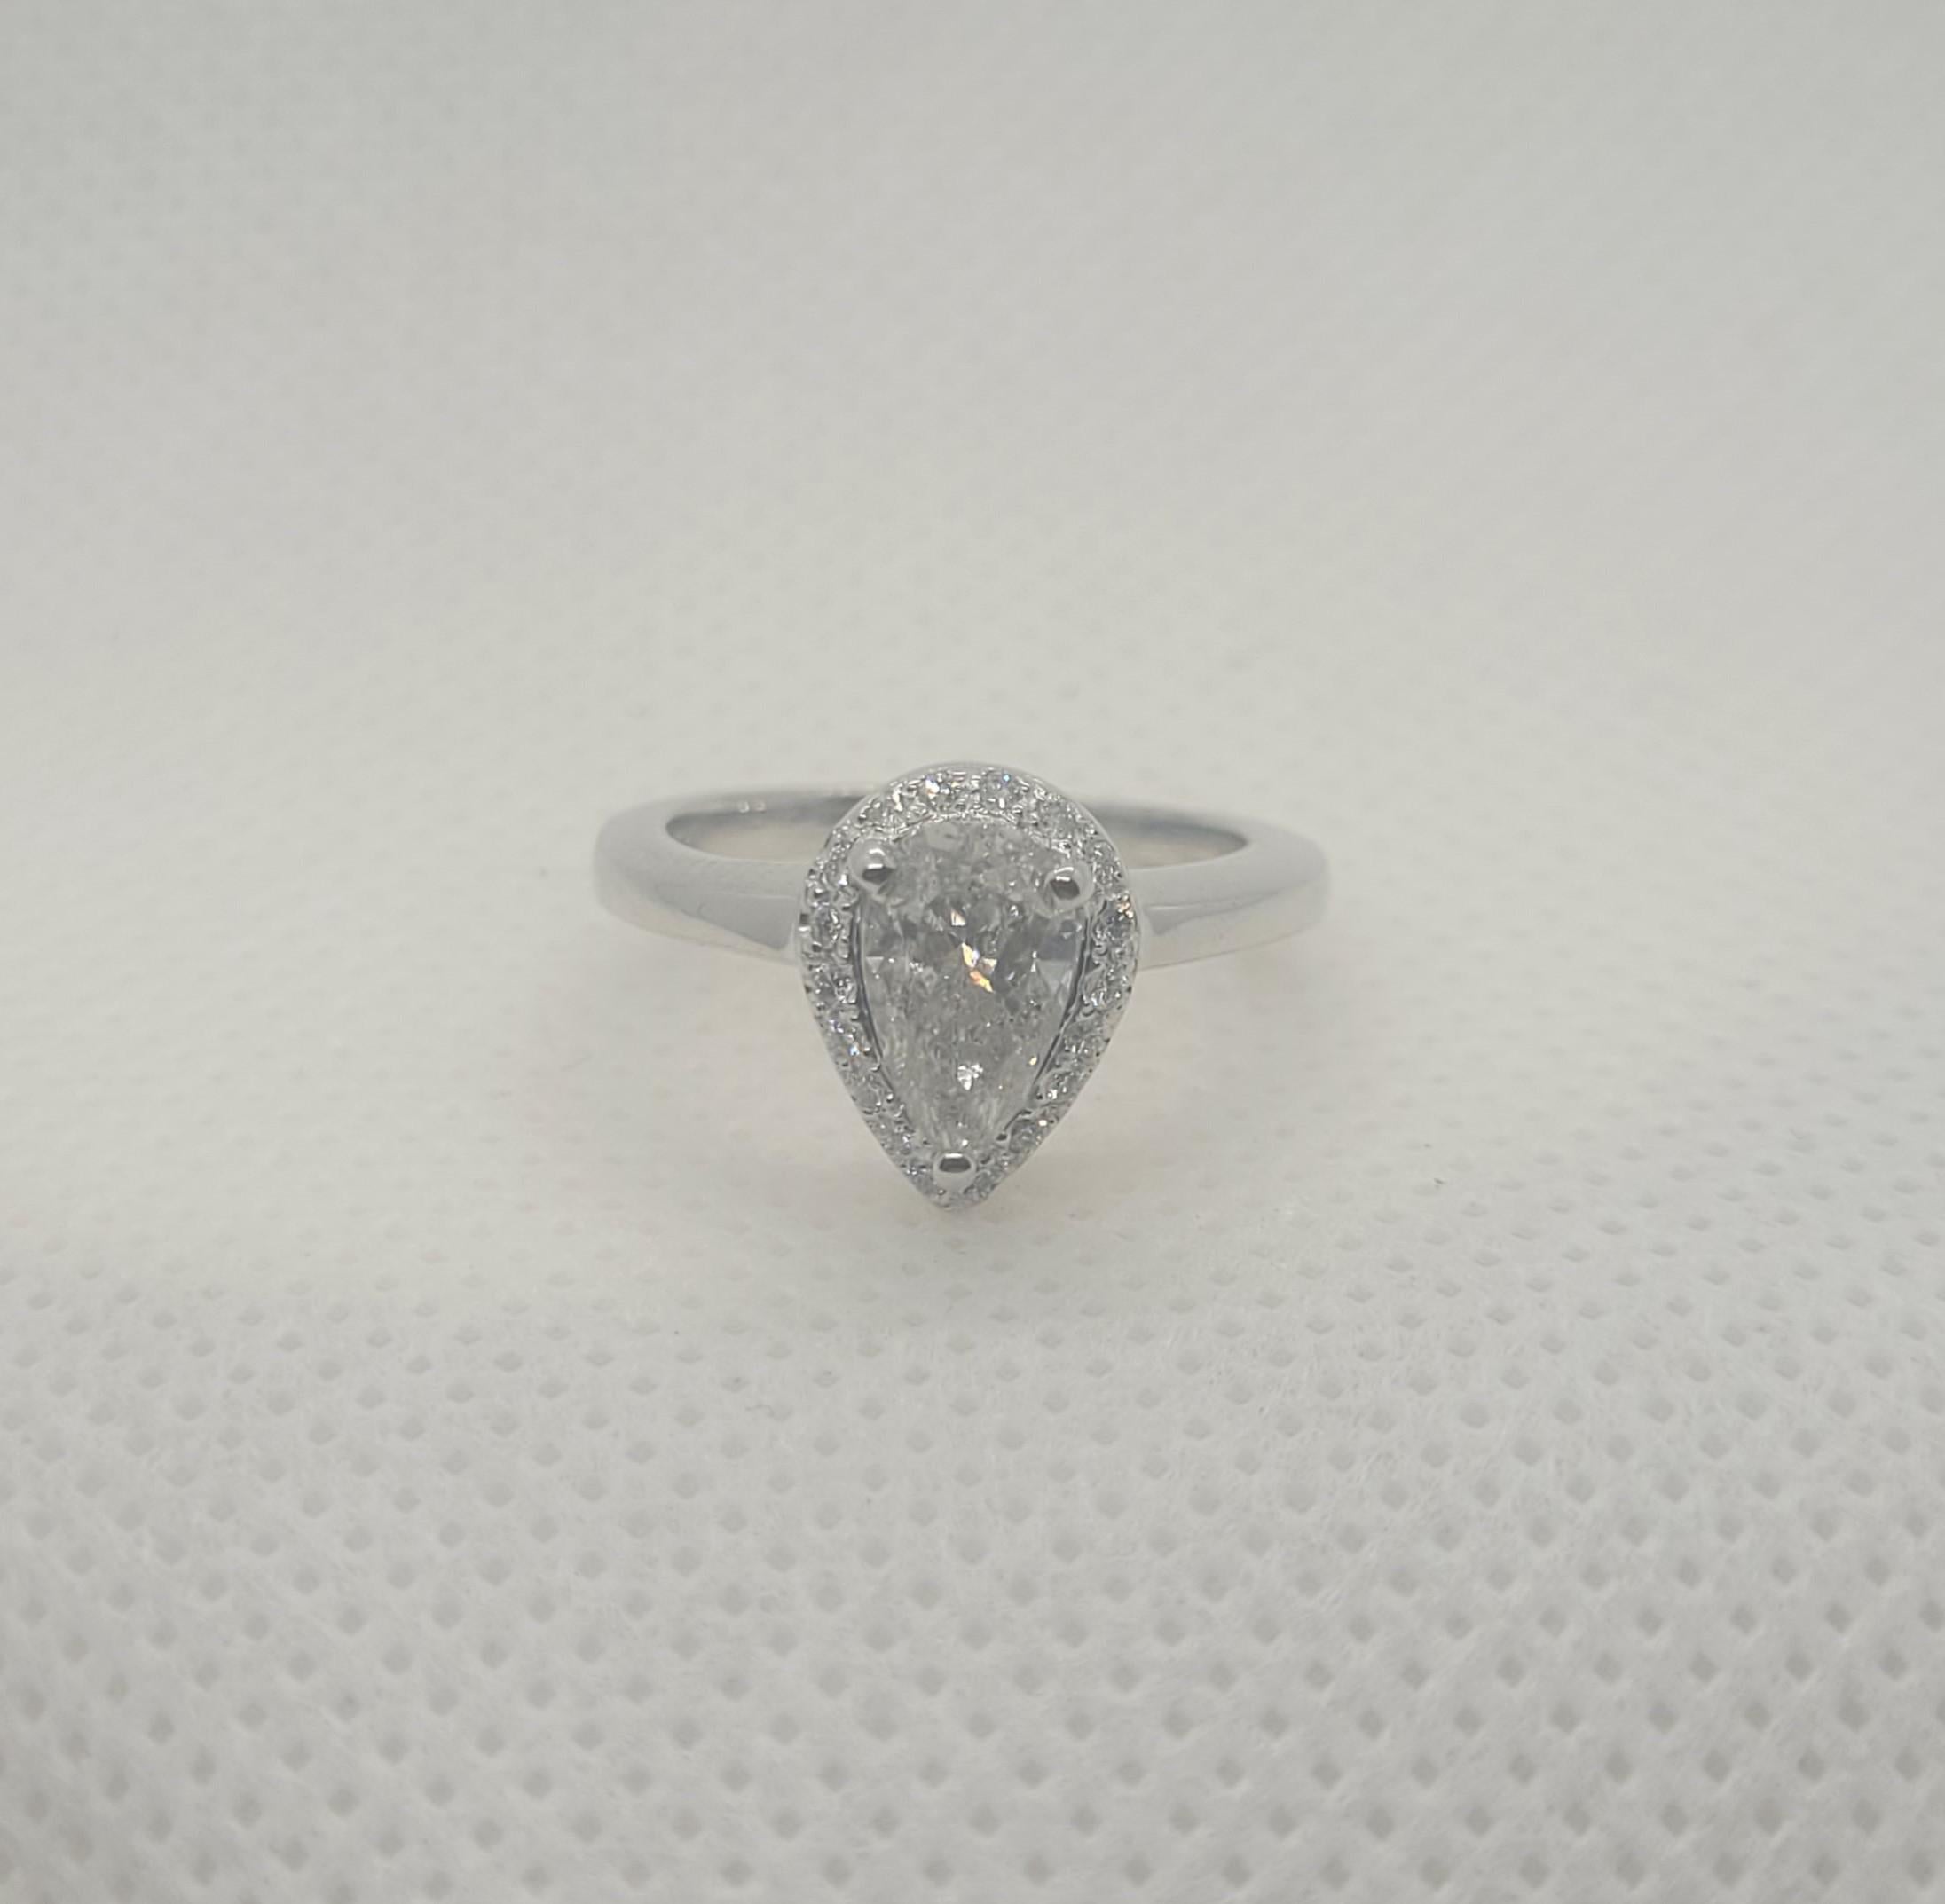 Lovely 14kt white gold ring with a .80ct pear-shaped diamond (approx. weight) surrounded by an 18-round brilliant diamond halo. The center diamond is G in color and I2 in clarity, surrounded by 18 round brilliant diamonds of approximately .25cttw.